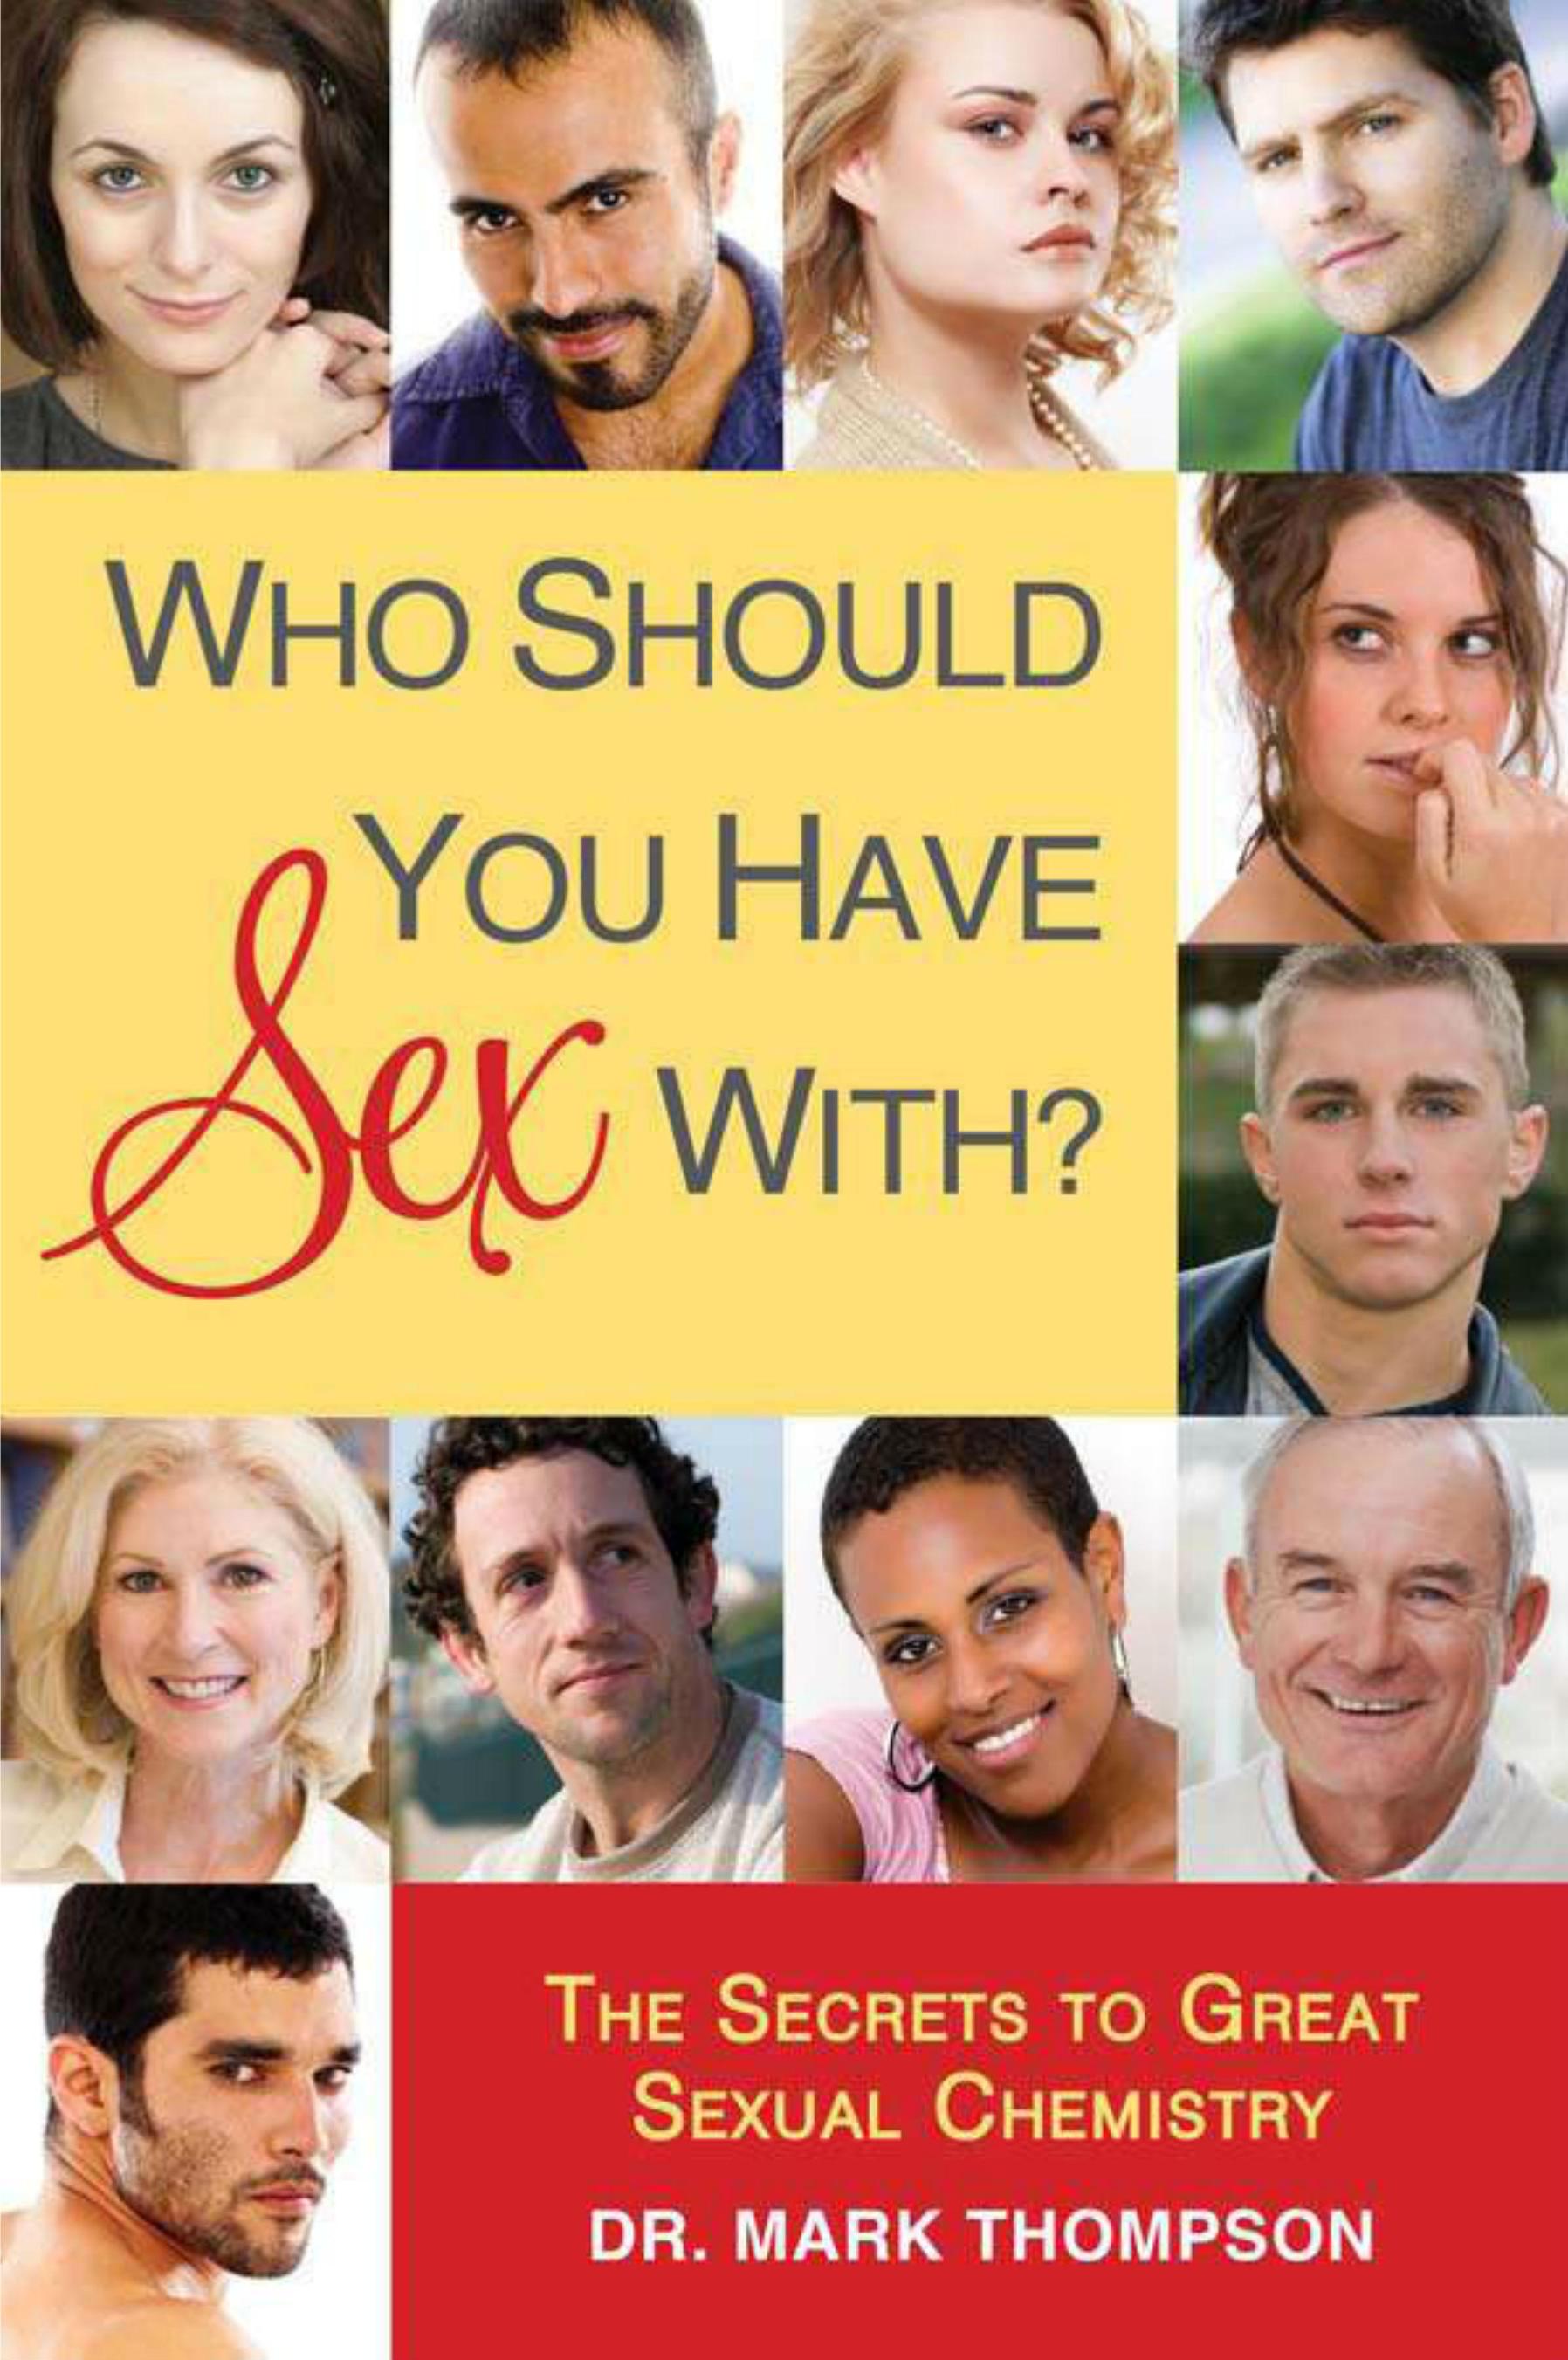 Who Should You Have Sex With by The Secrets to Great Sexual Chemistry By Mark Thompson Dr